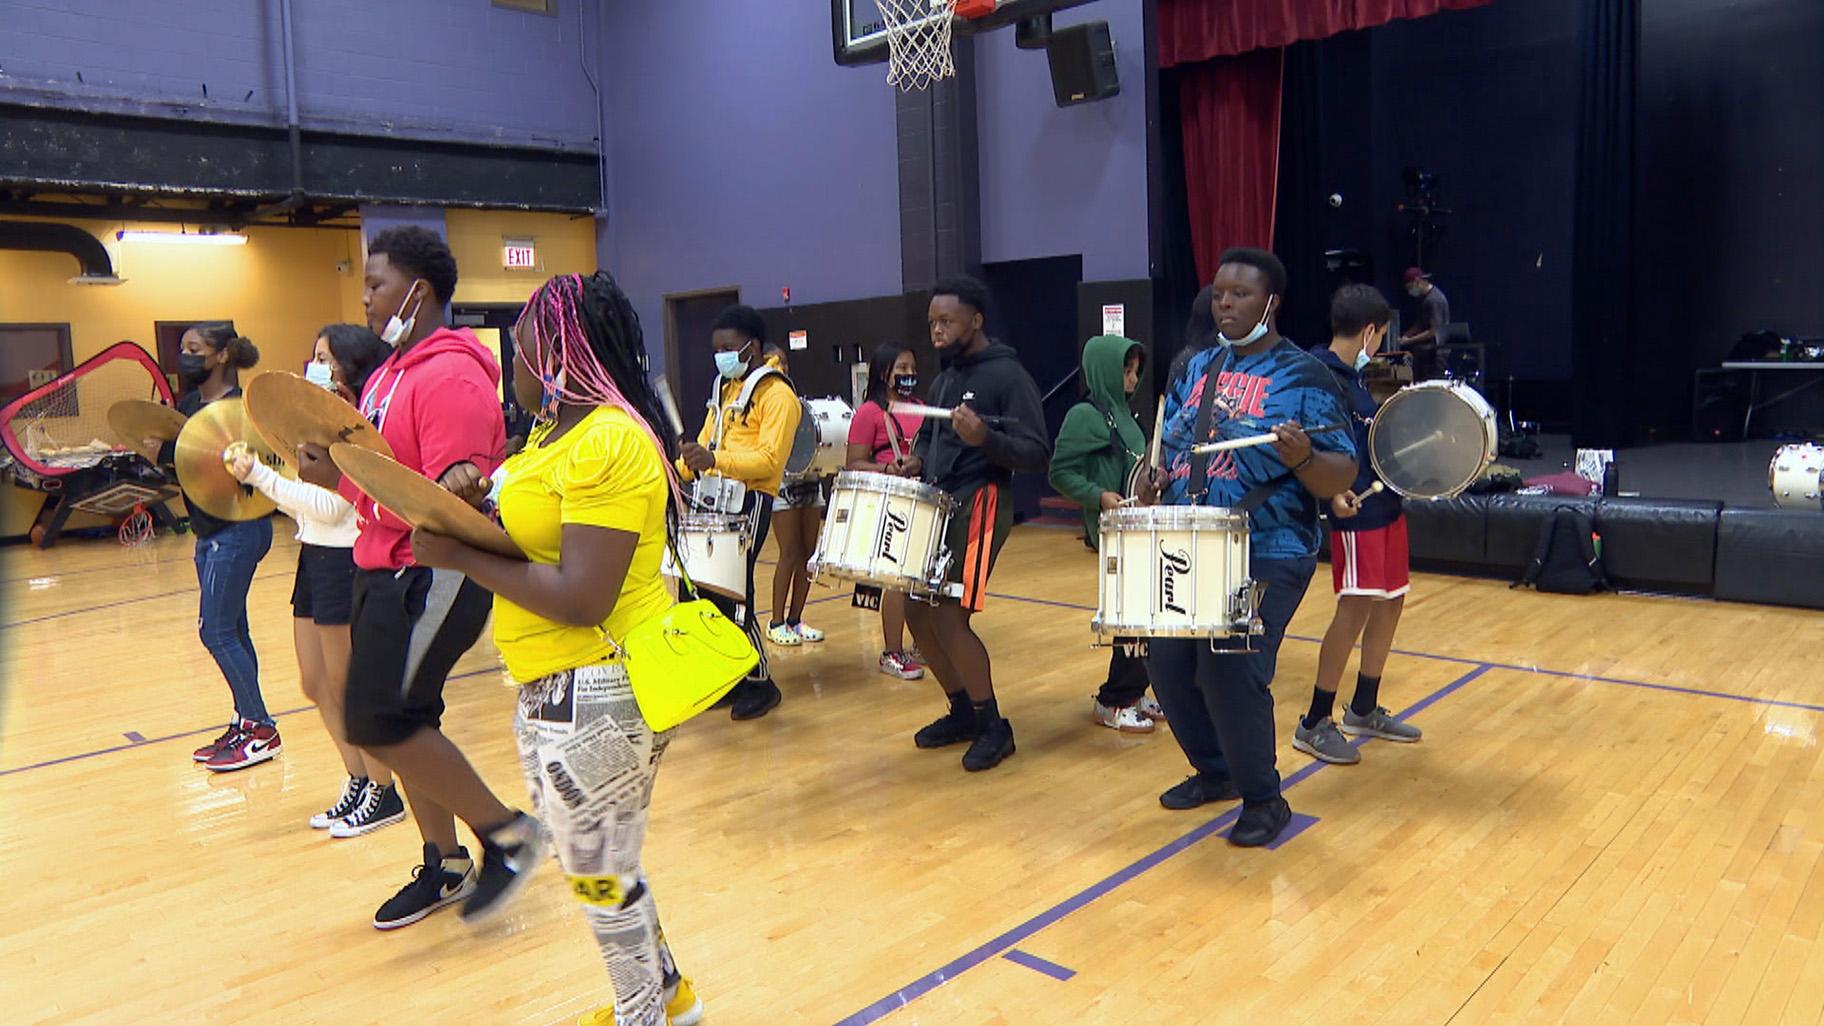 Hope Junior Drumline and WestDance have been practicing three hours a day, five days a week since late June to prepare for their performance at Lollapalooza. (WTTW News)